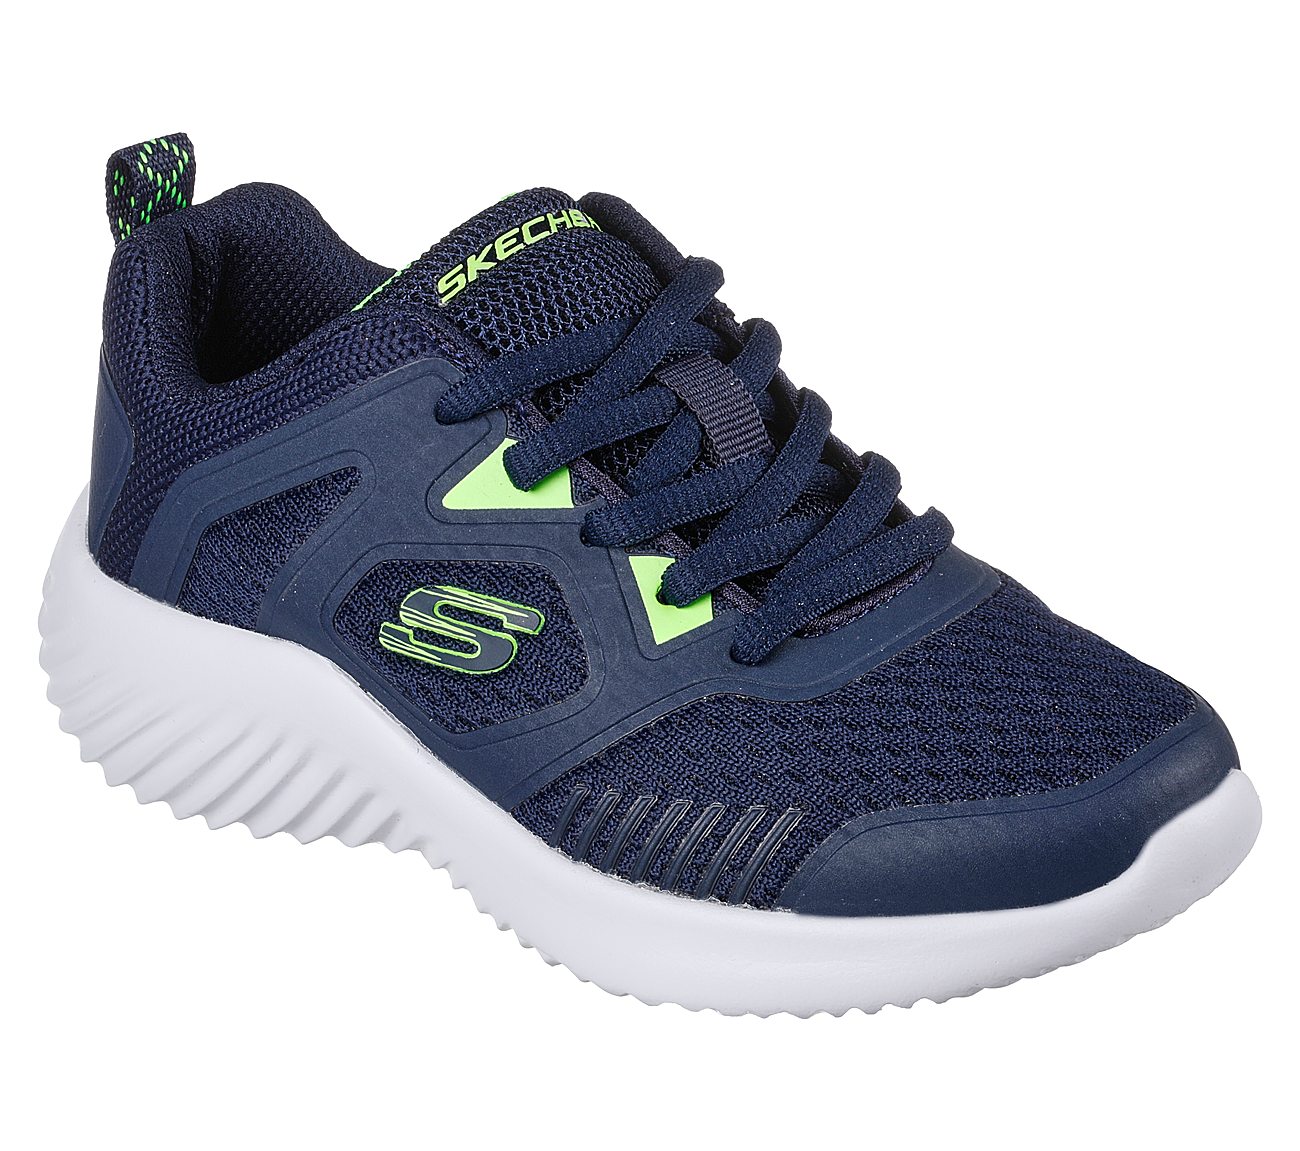 BOUNDER, NAVY/LIME Footwear Right View